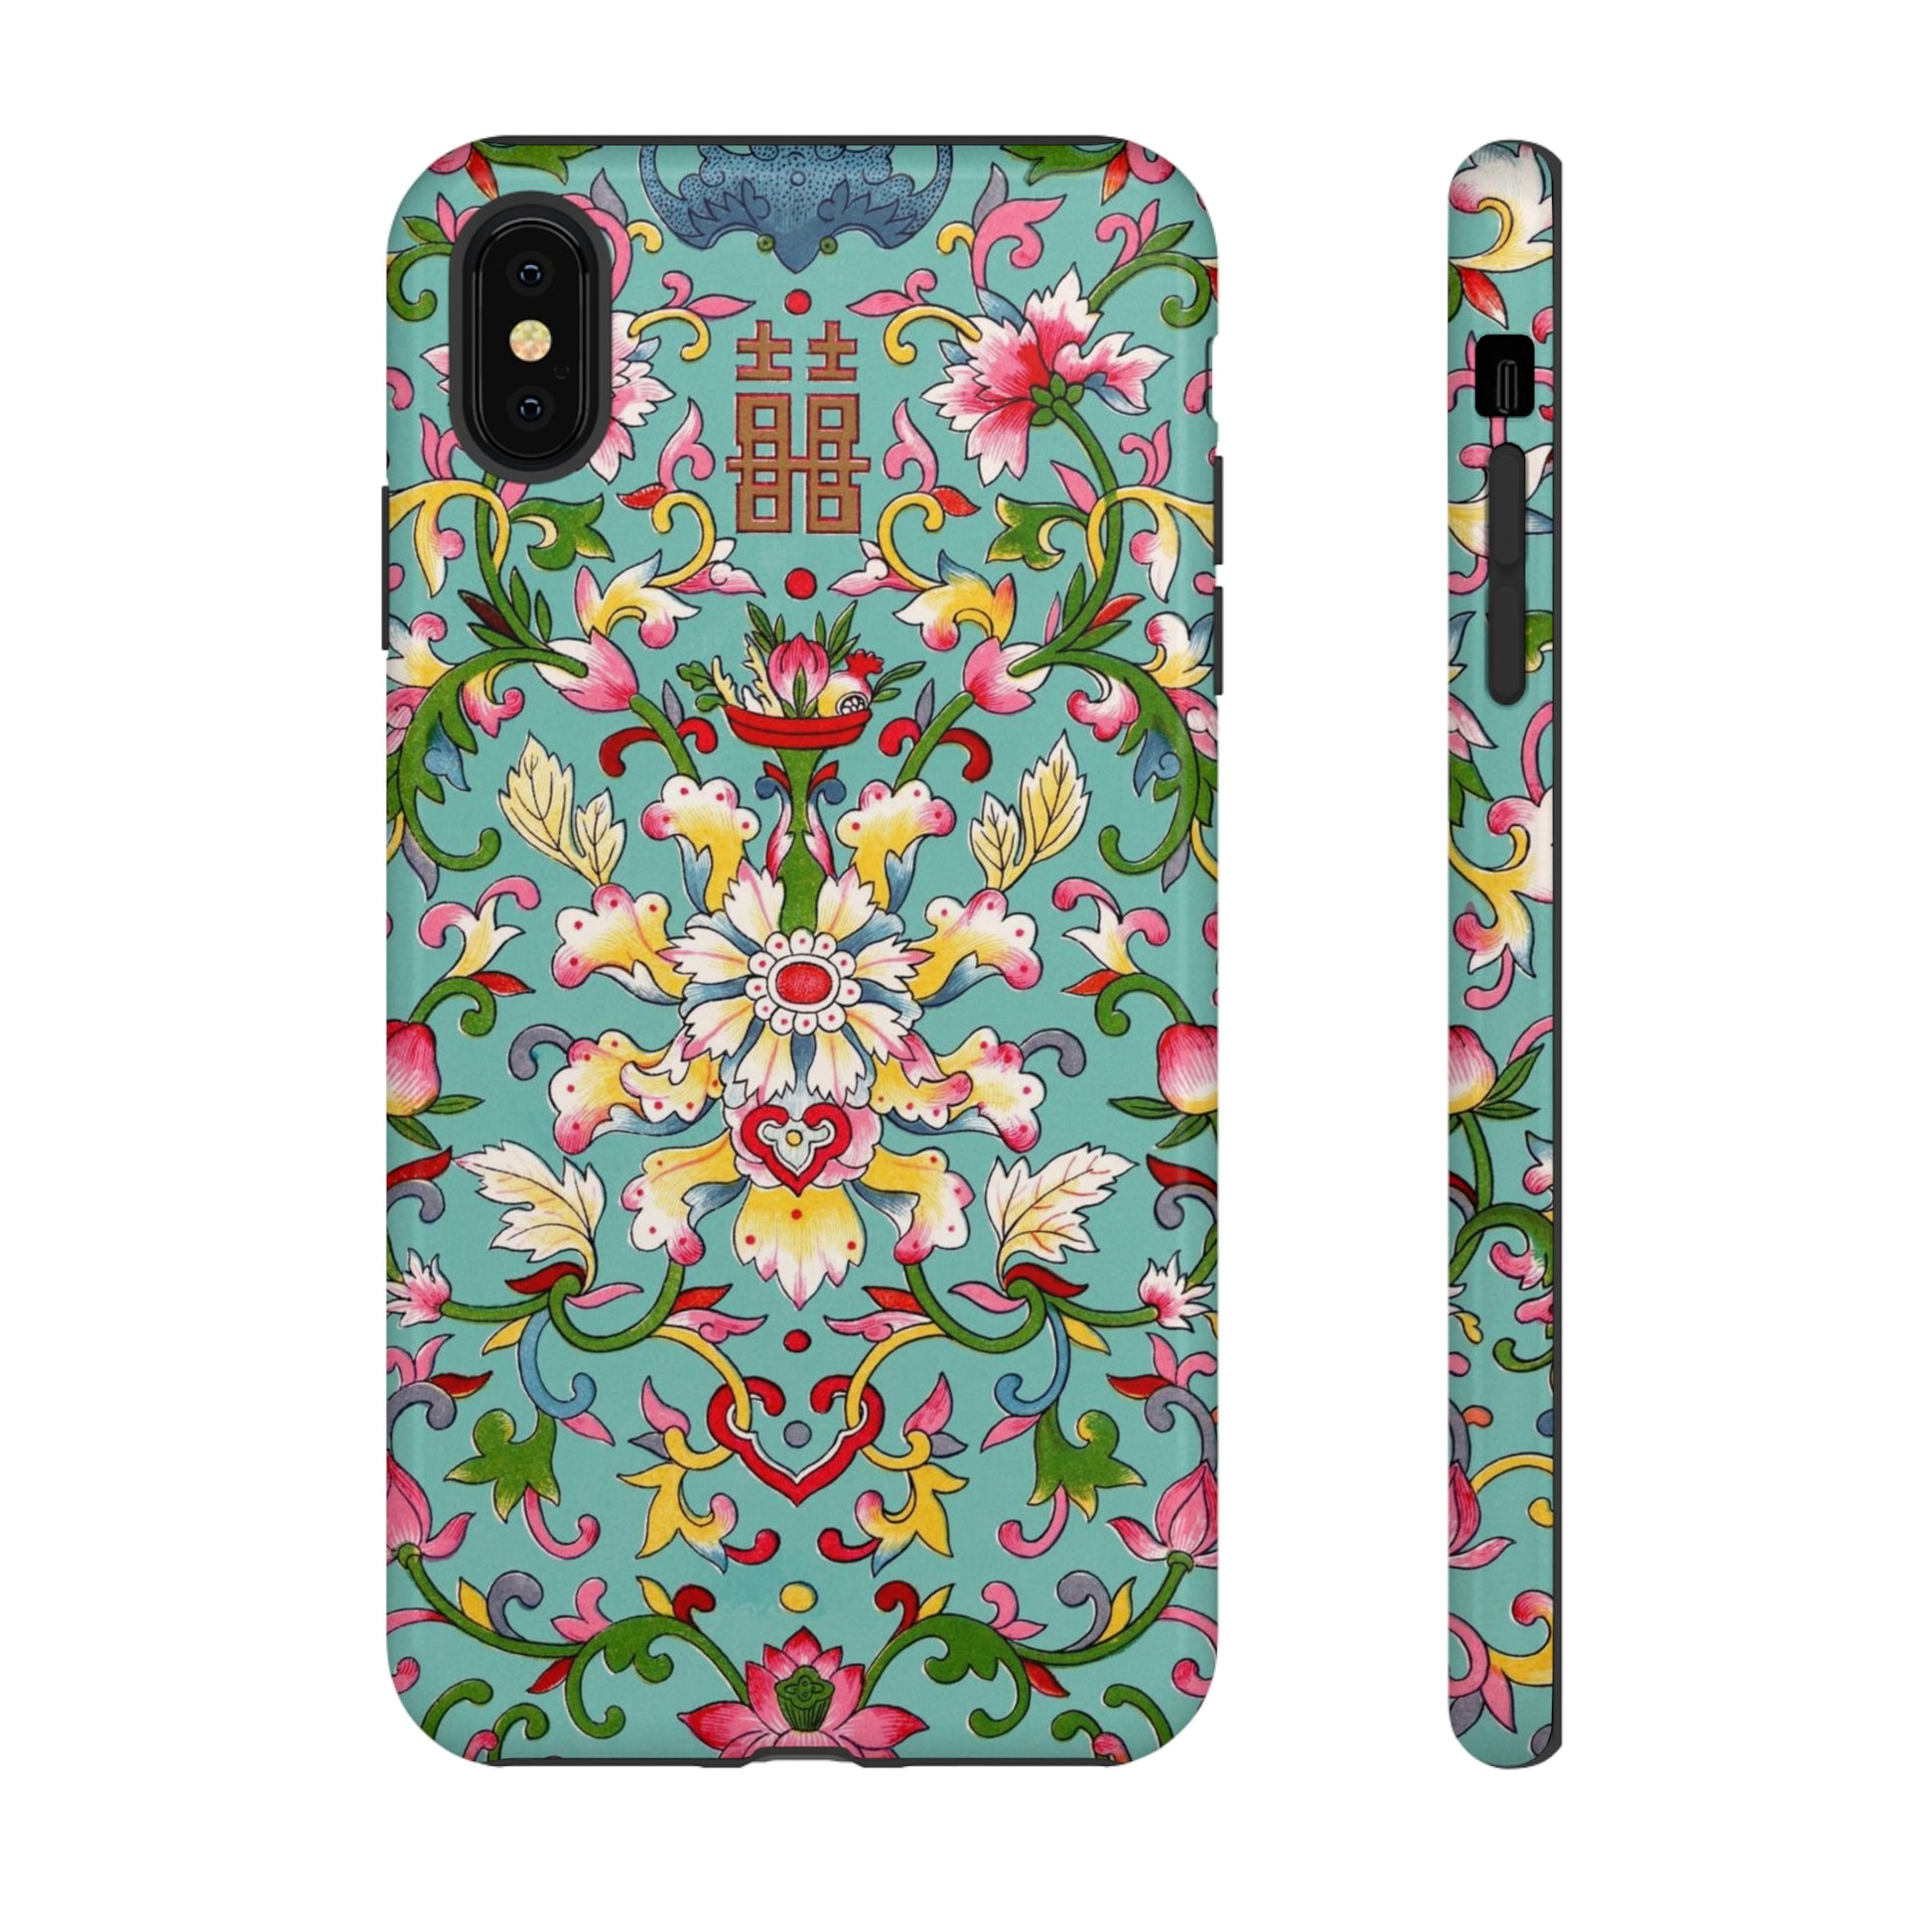 Floral Family Phone Case - BRYKNOLO LLC Phone Case iPhone XS MAX / Glossy